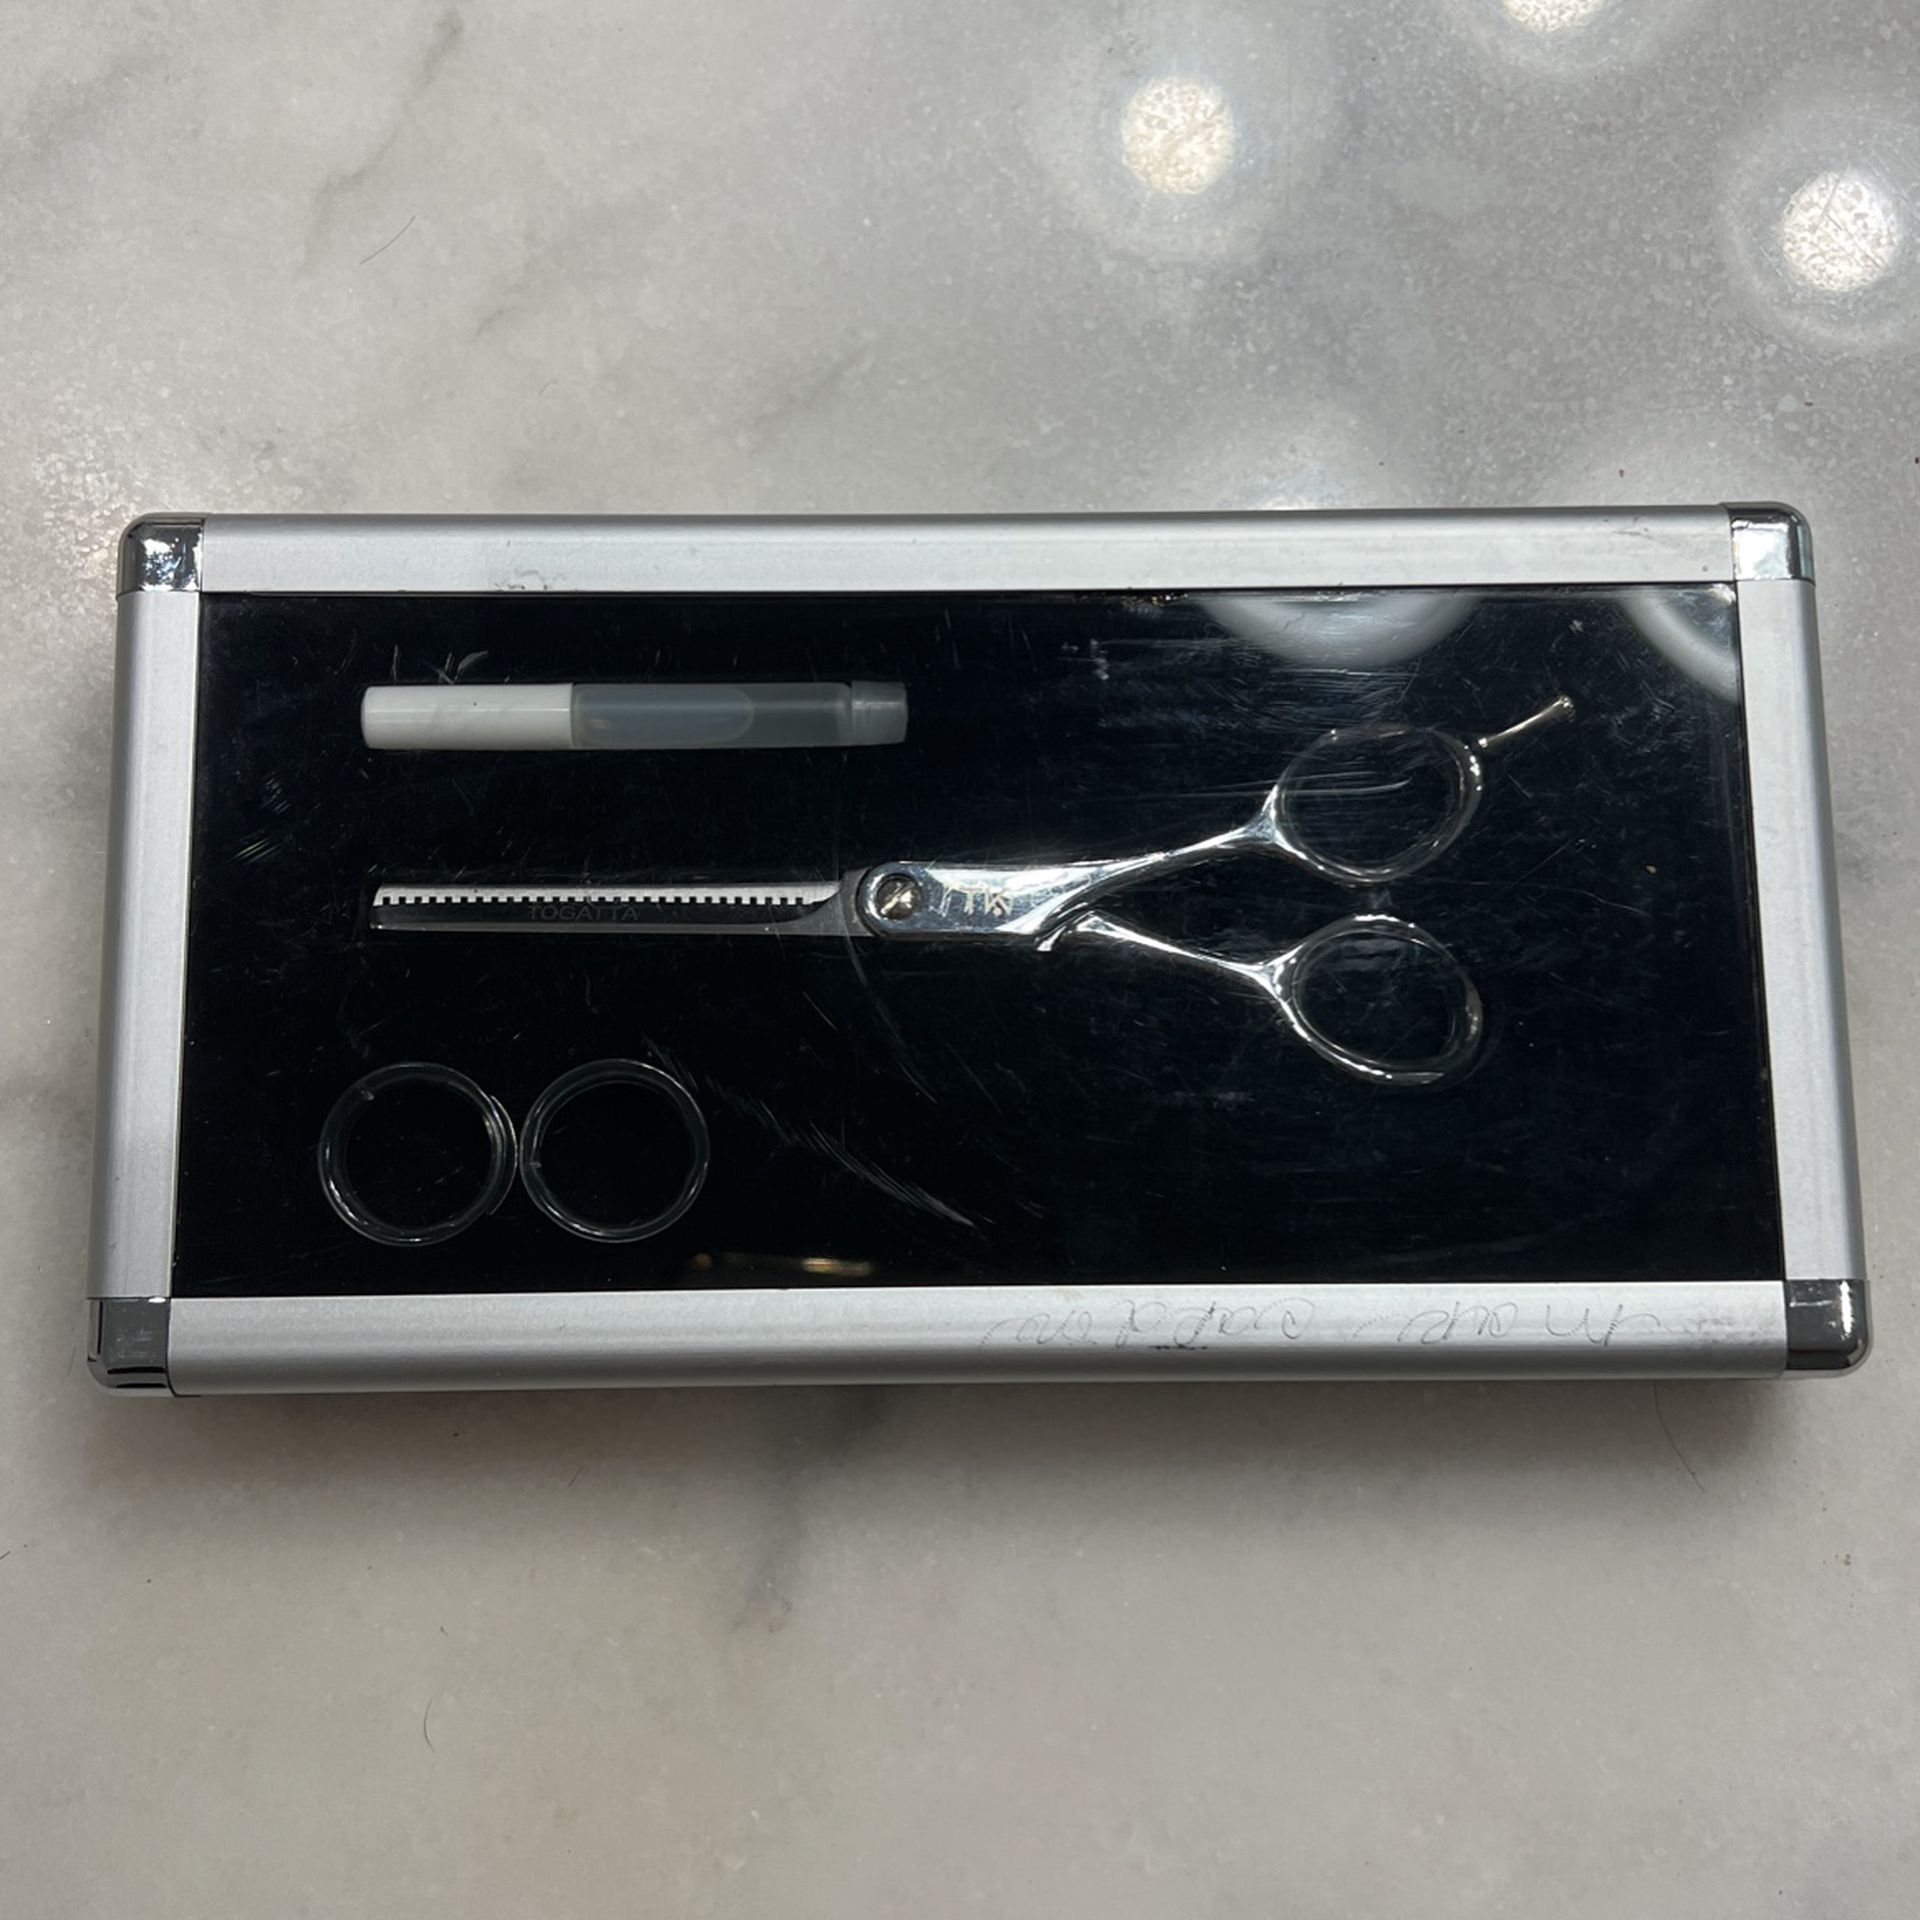 TK Togatta 28 Tooth Trimming Hairdresser Hair cutters Shears Made In Japan 